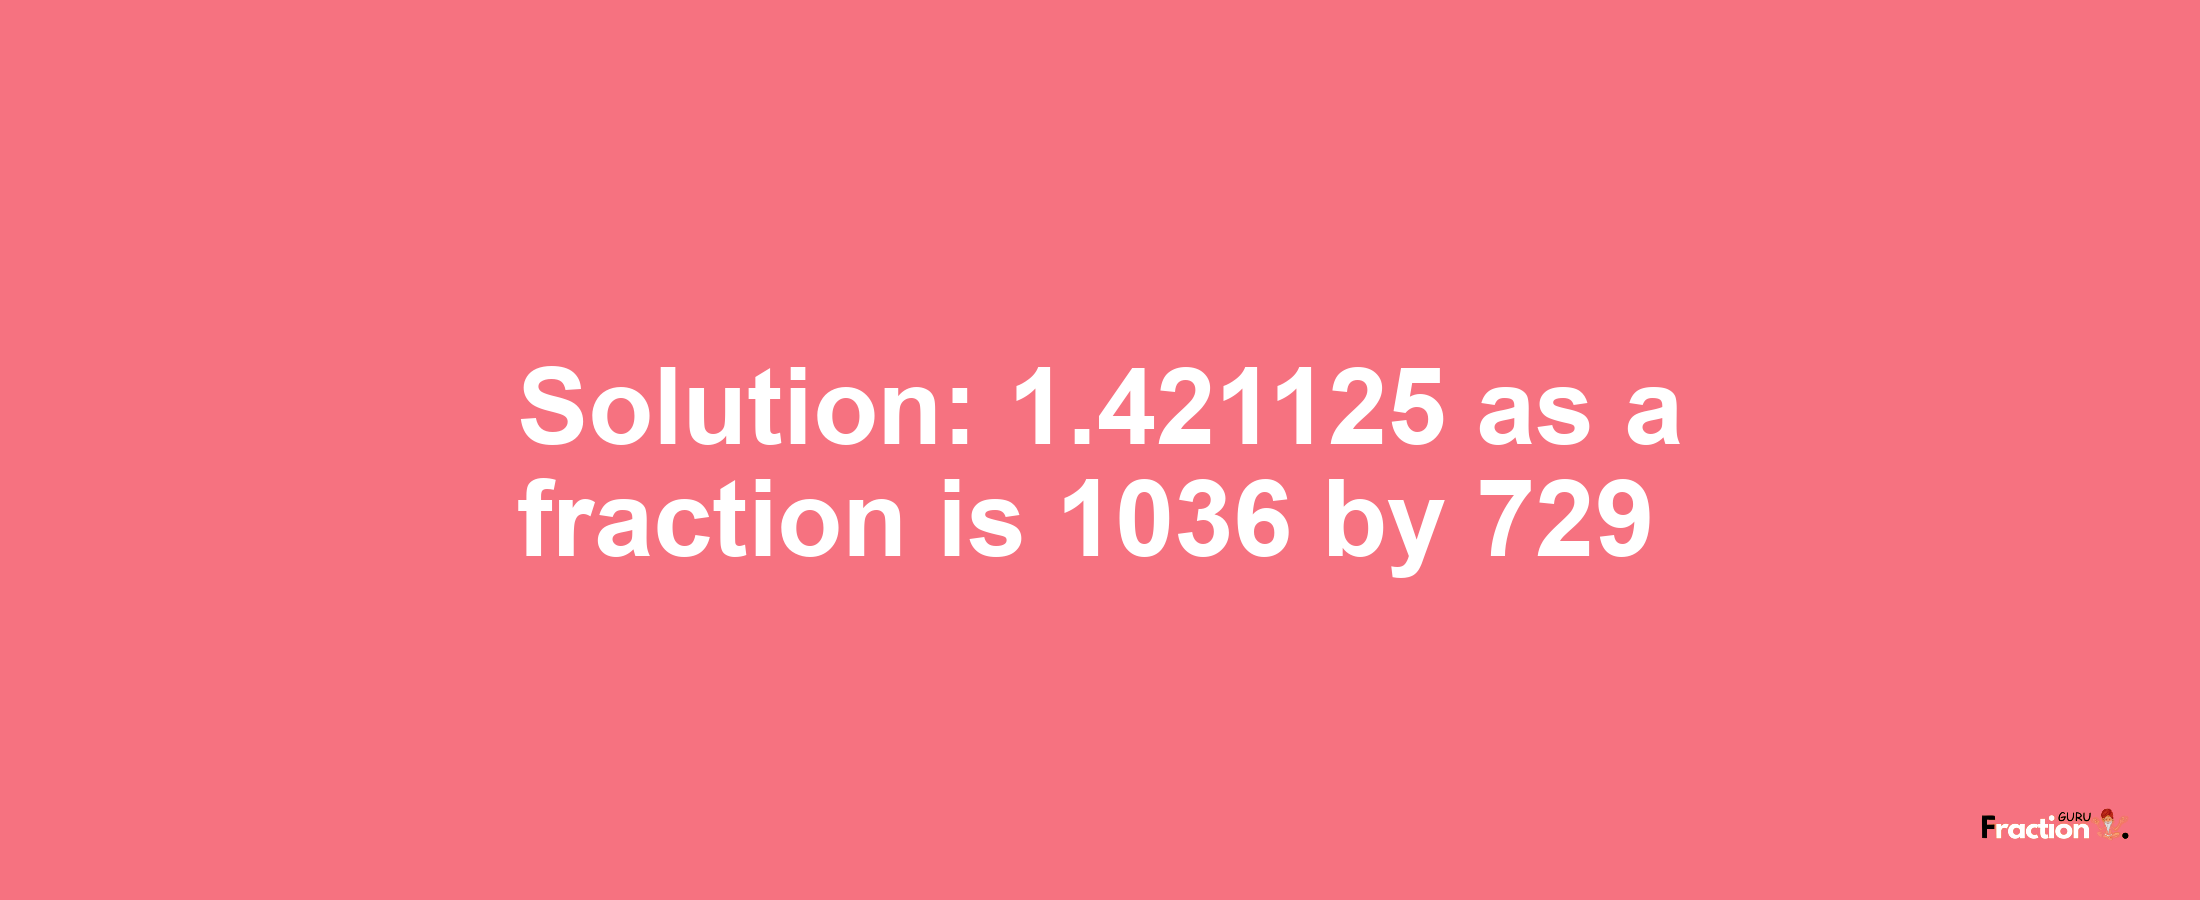 Solution:1.421125 as a fraction is 1036/729